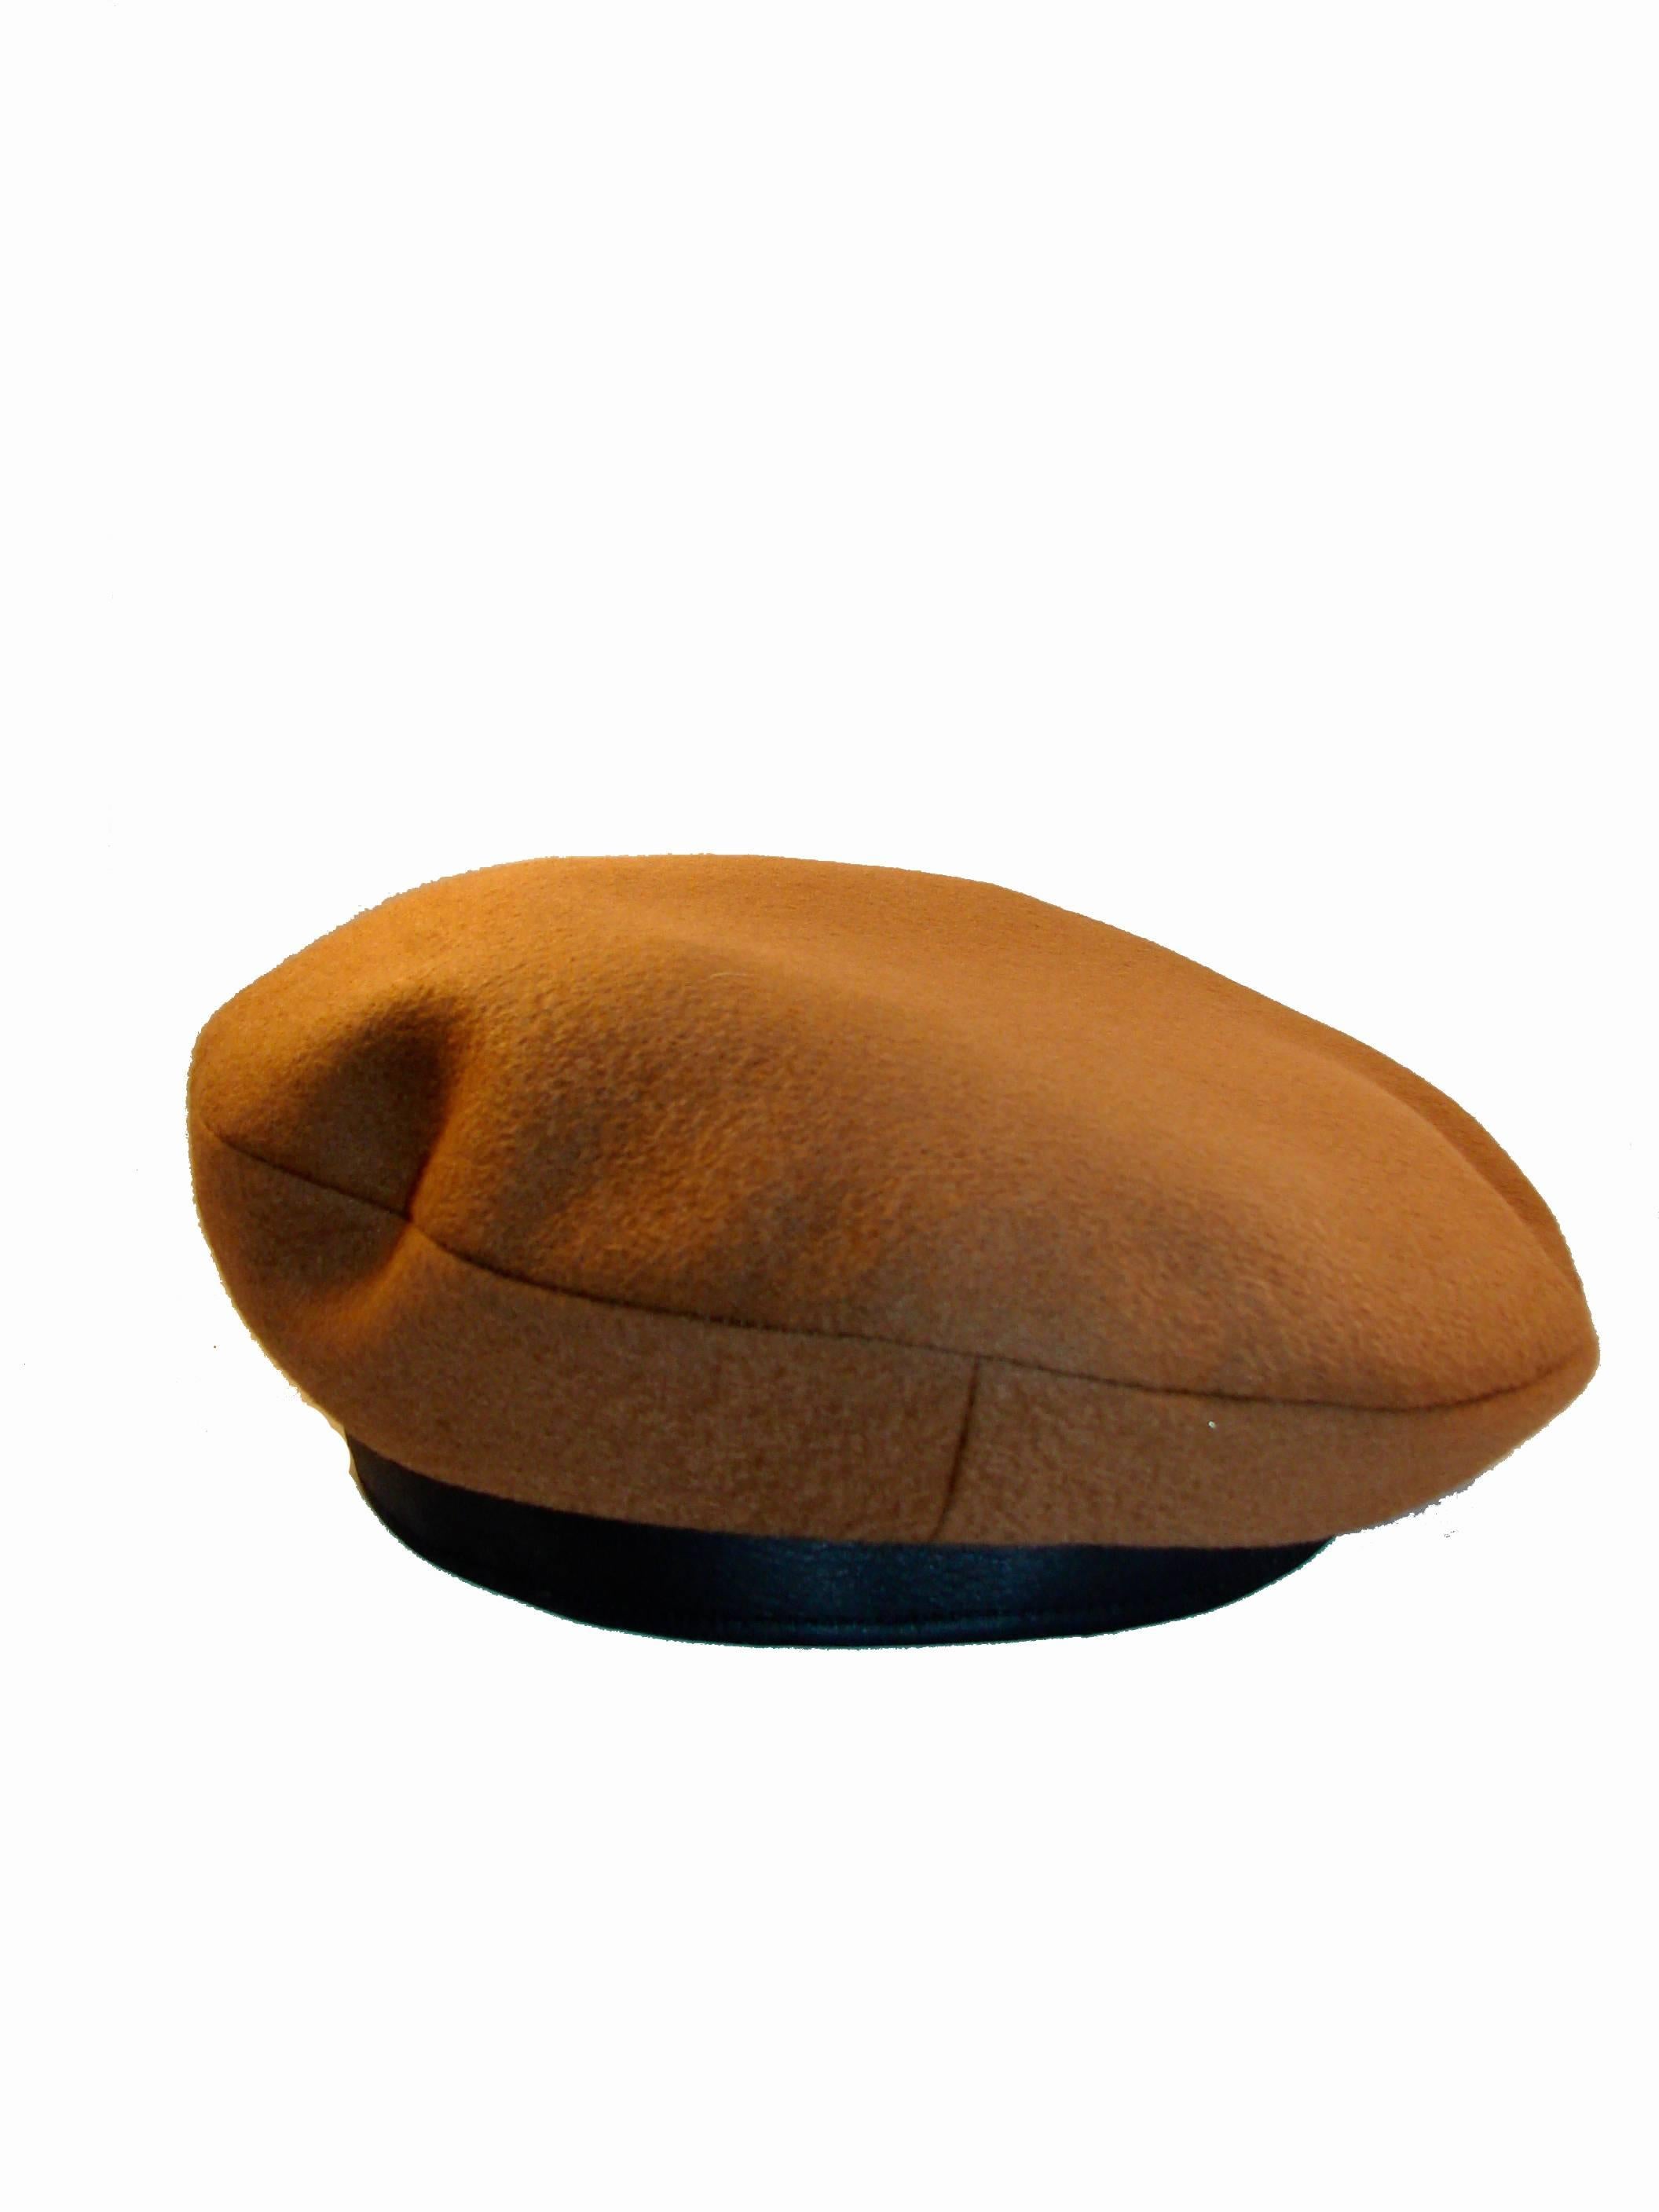 Here's a gorgeous camel-colored cashmere and dark brown leather beret from Hermes.  Fully-lined. In very good preowned condition with some minor scratching to the leather trim (hard to see unless closely inspecting).  Tagged HERMES and SIZE 59, it